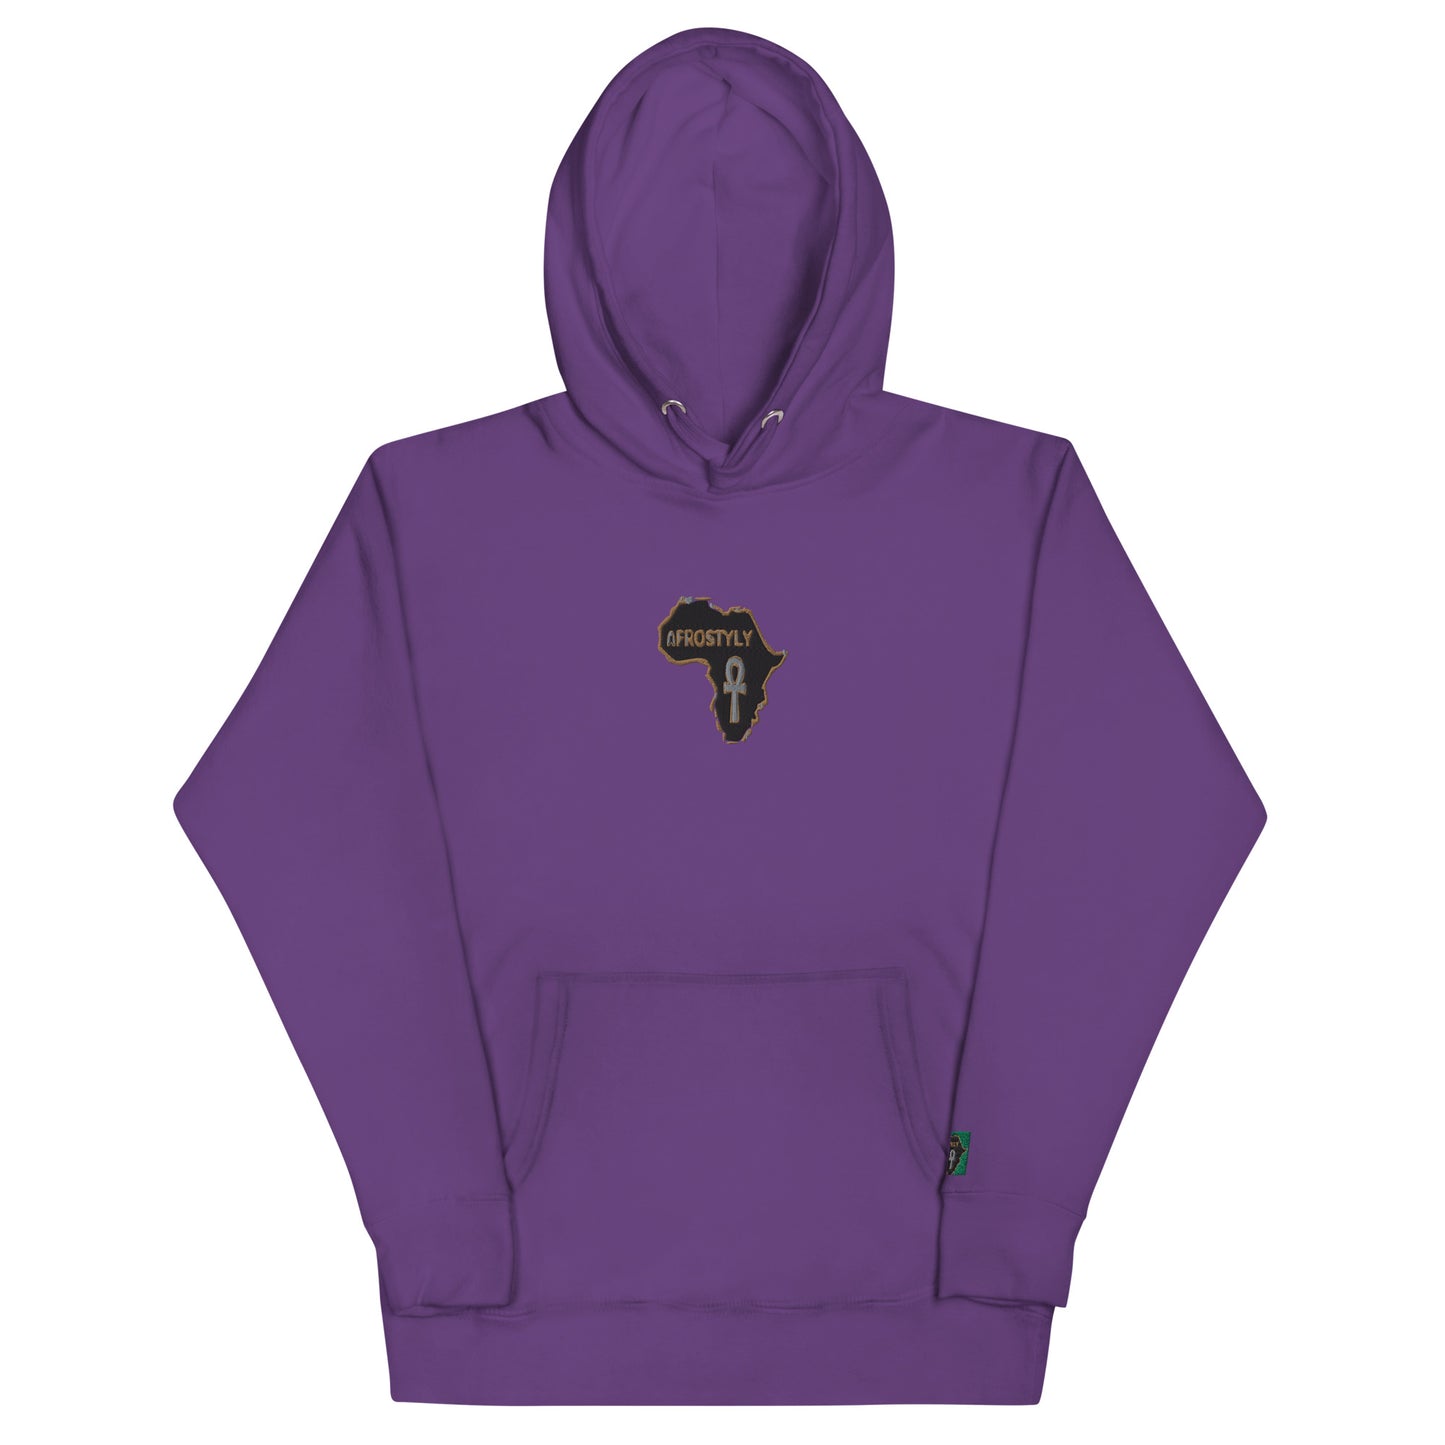 AFROSTYLY Unisex Hoodie